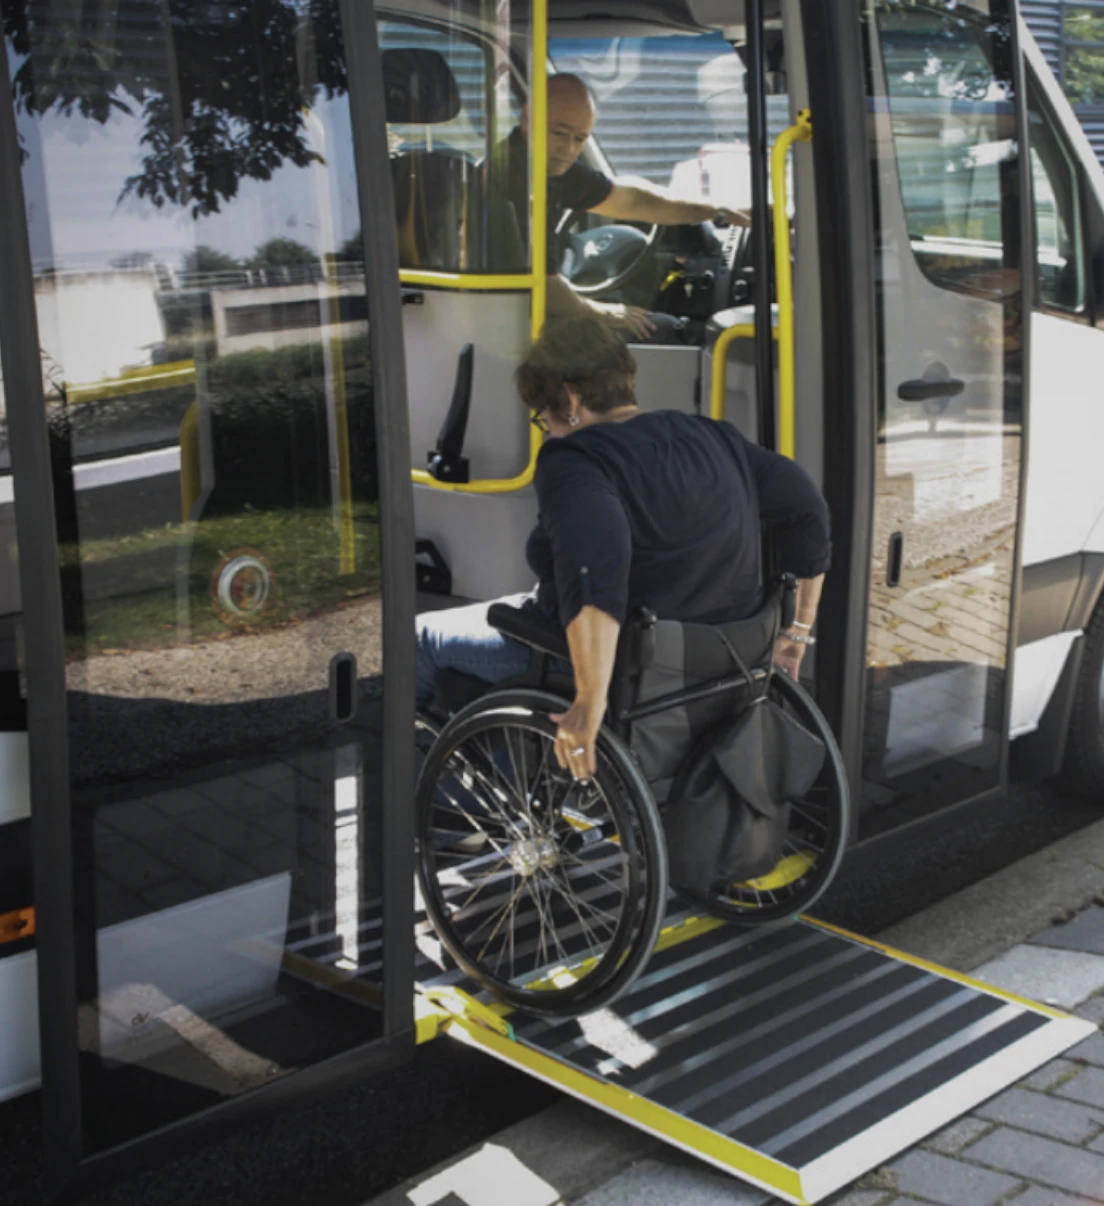 A wheelchair user entering a low floor city bus via a small fold out ramp